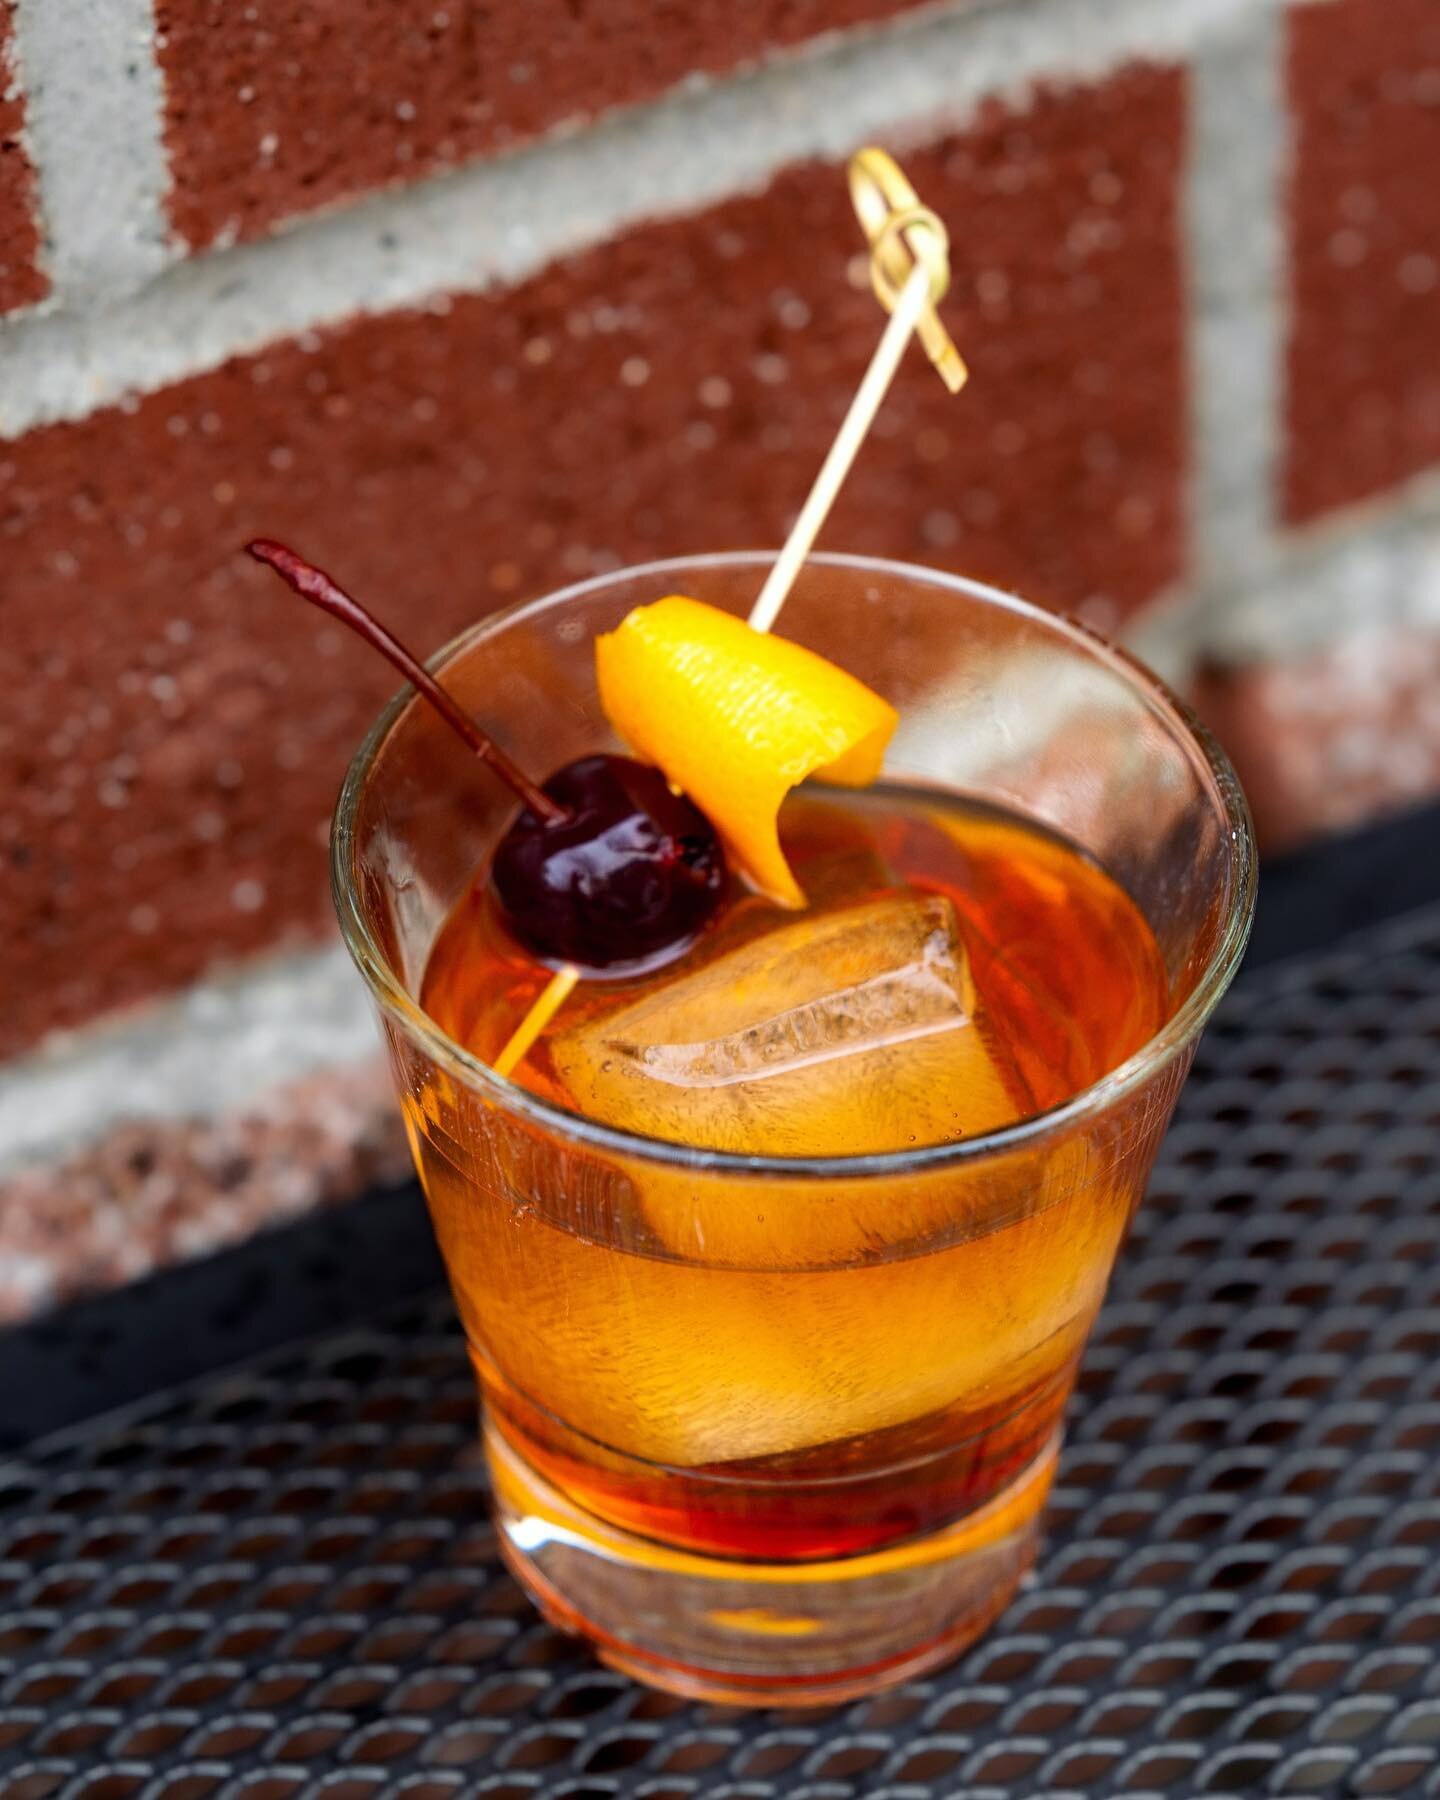 Beat the heat and cool down in style at The Northern with our refreshing Old Fashioned cocktail. Cheers to a delightful way to unwind!

#beatthehead #oldfashioned #whiskey #millcreek #thenorthern